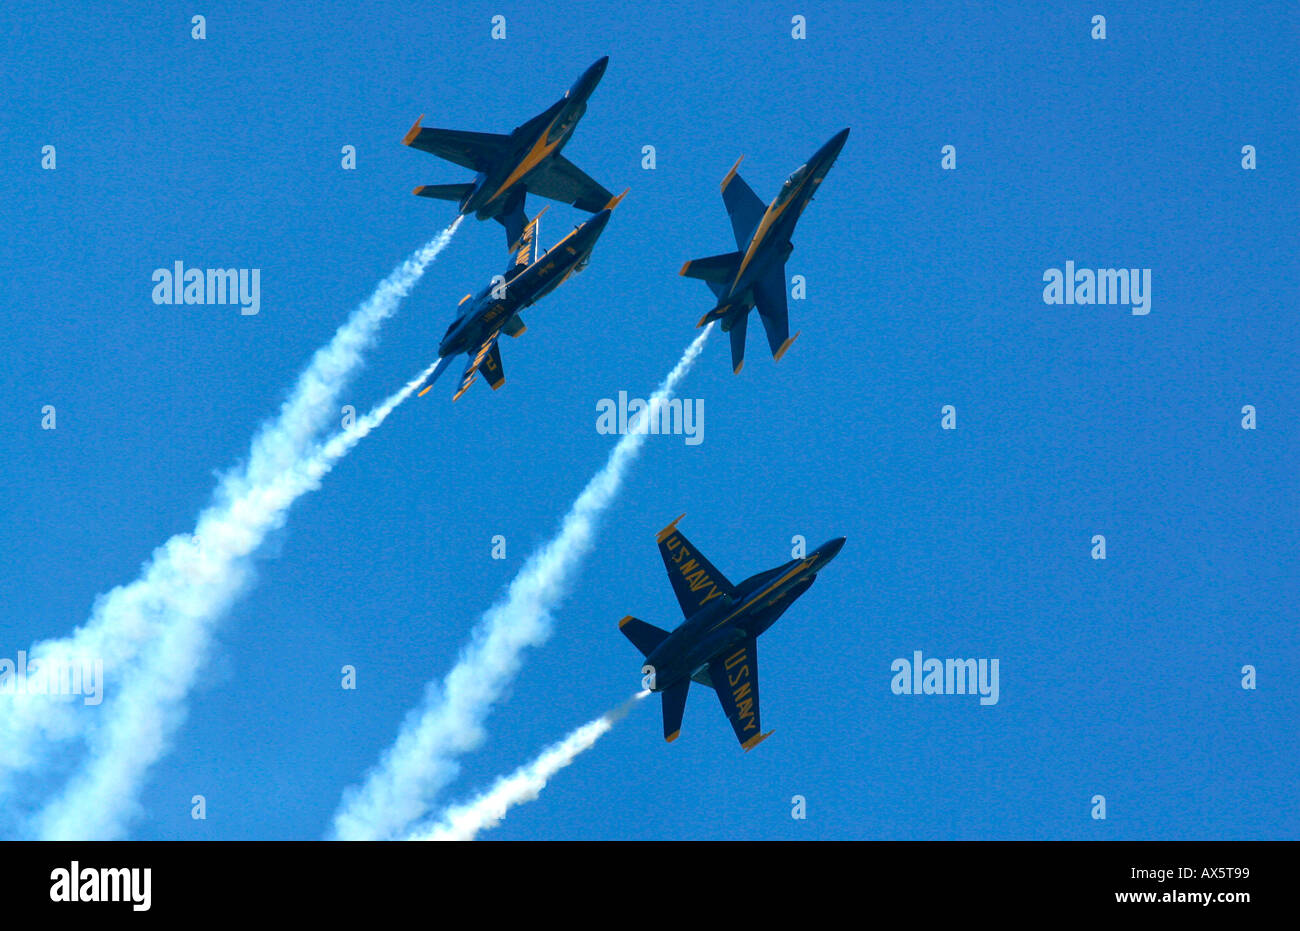 The Blue Angels FA 18s silhouetted breaking formation with trails of white smoke against a clear blue sky Stock Photo